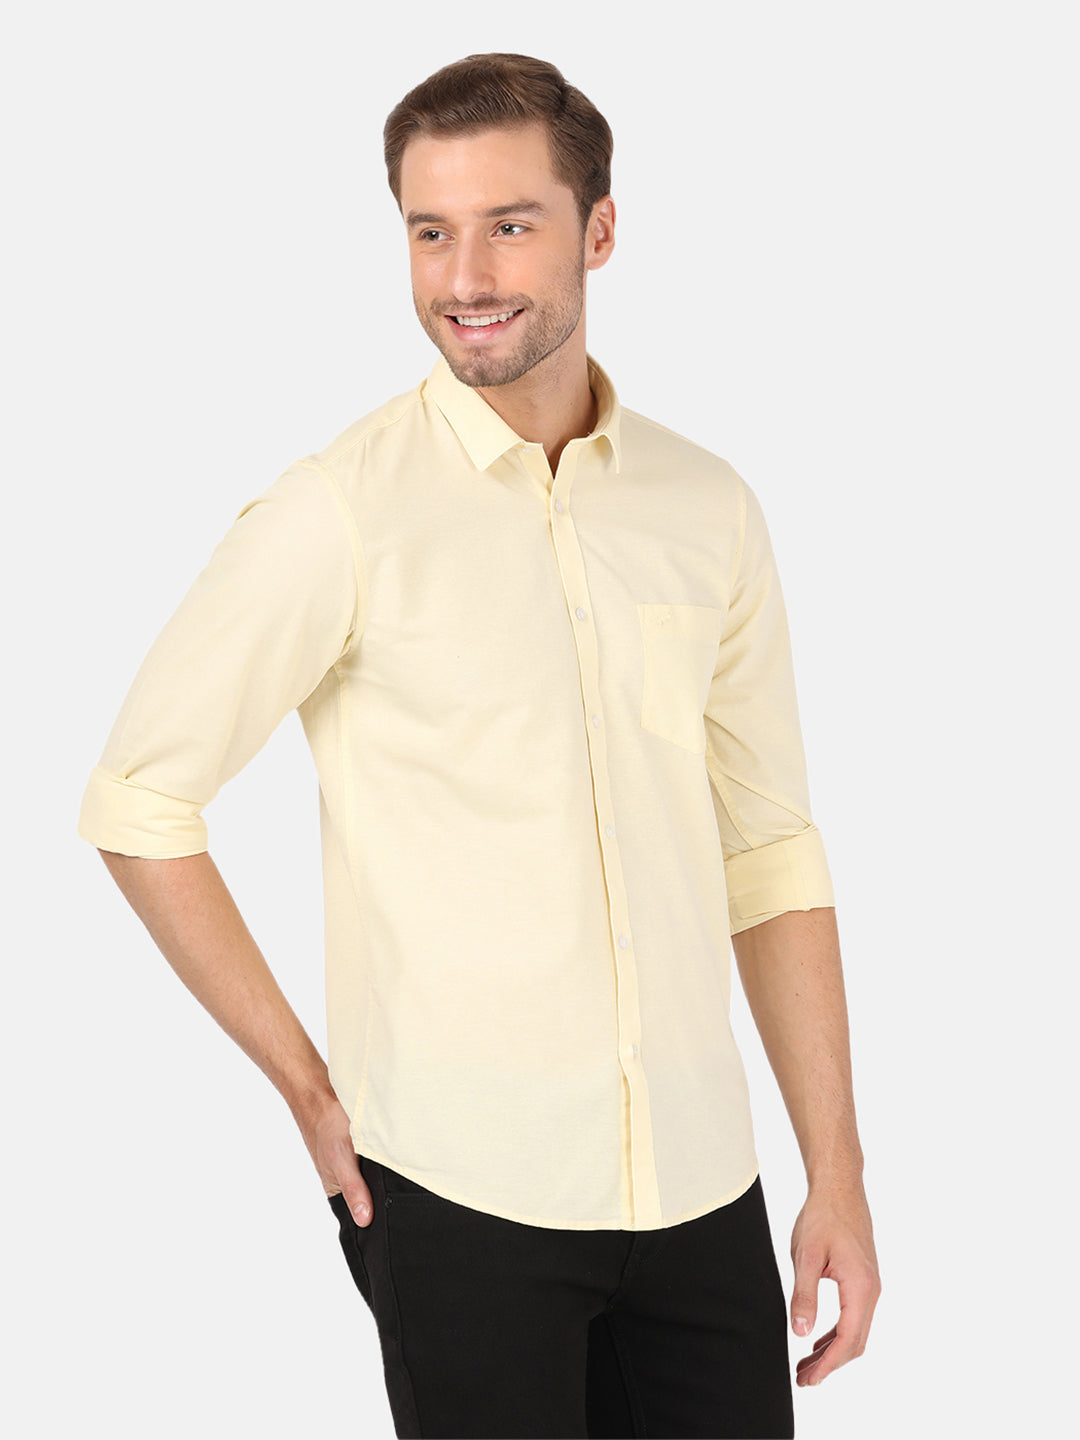 Casual Full Sleeve Slim Fit Solid Yellow with Collar Shirt for Men